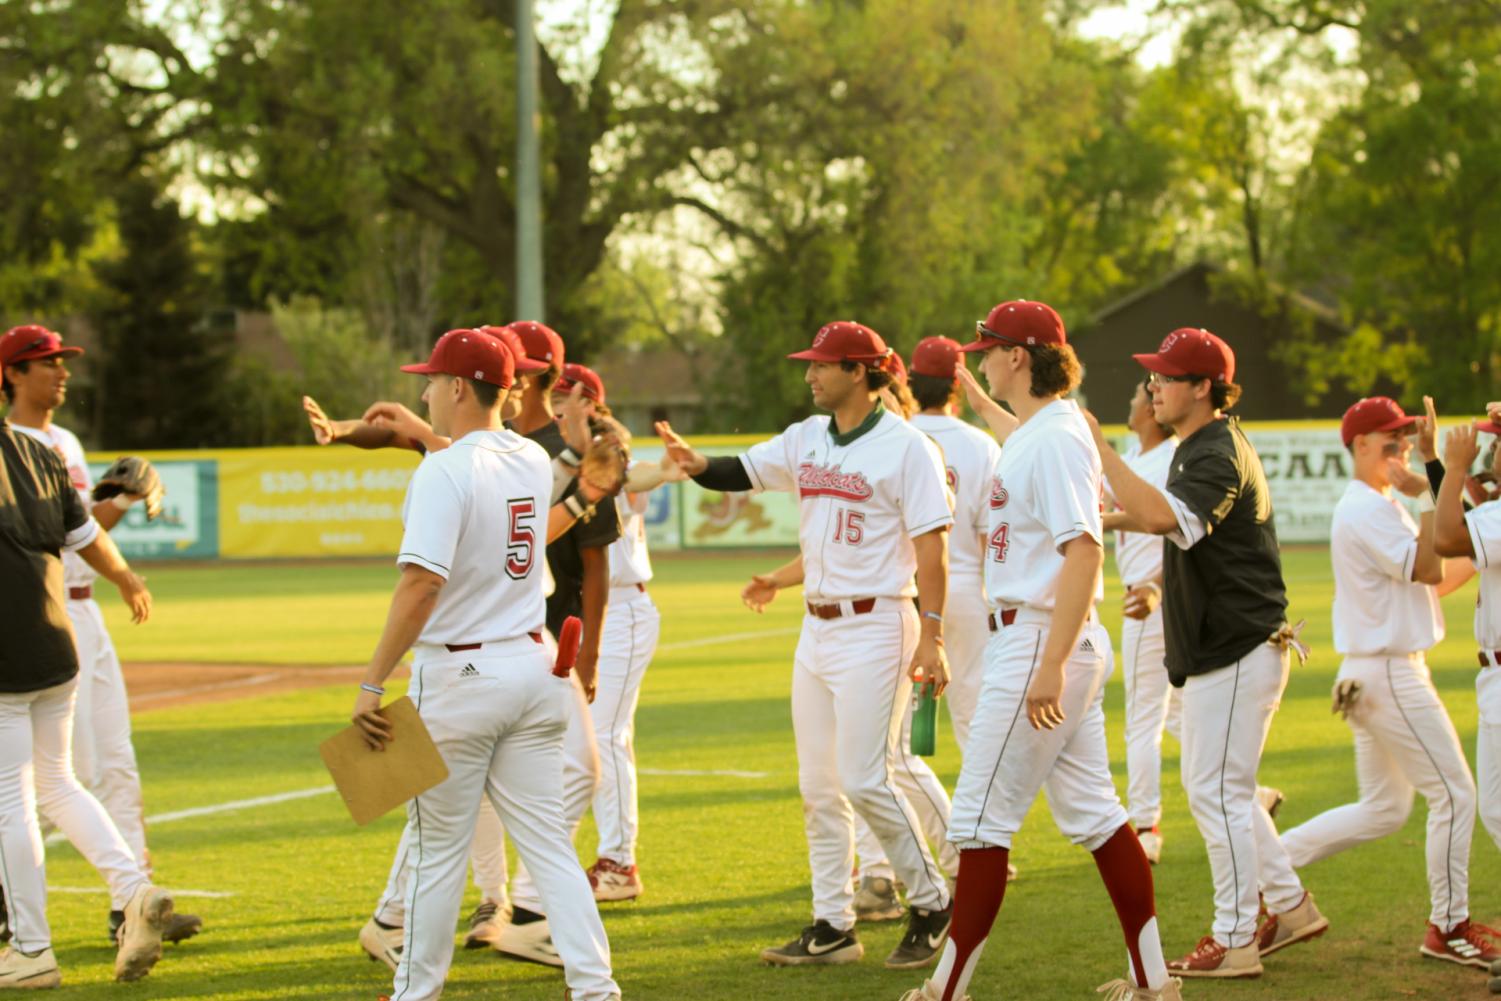 After the top on the second inning being completed, a group of Wildcat baseball players show their support to the fielders on getting out of the inning.